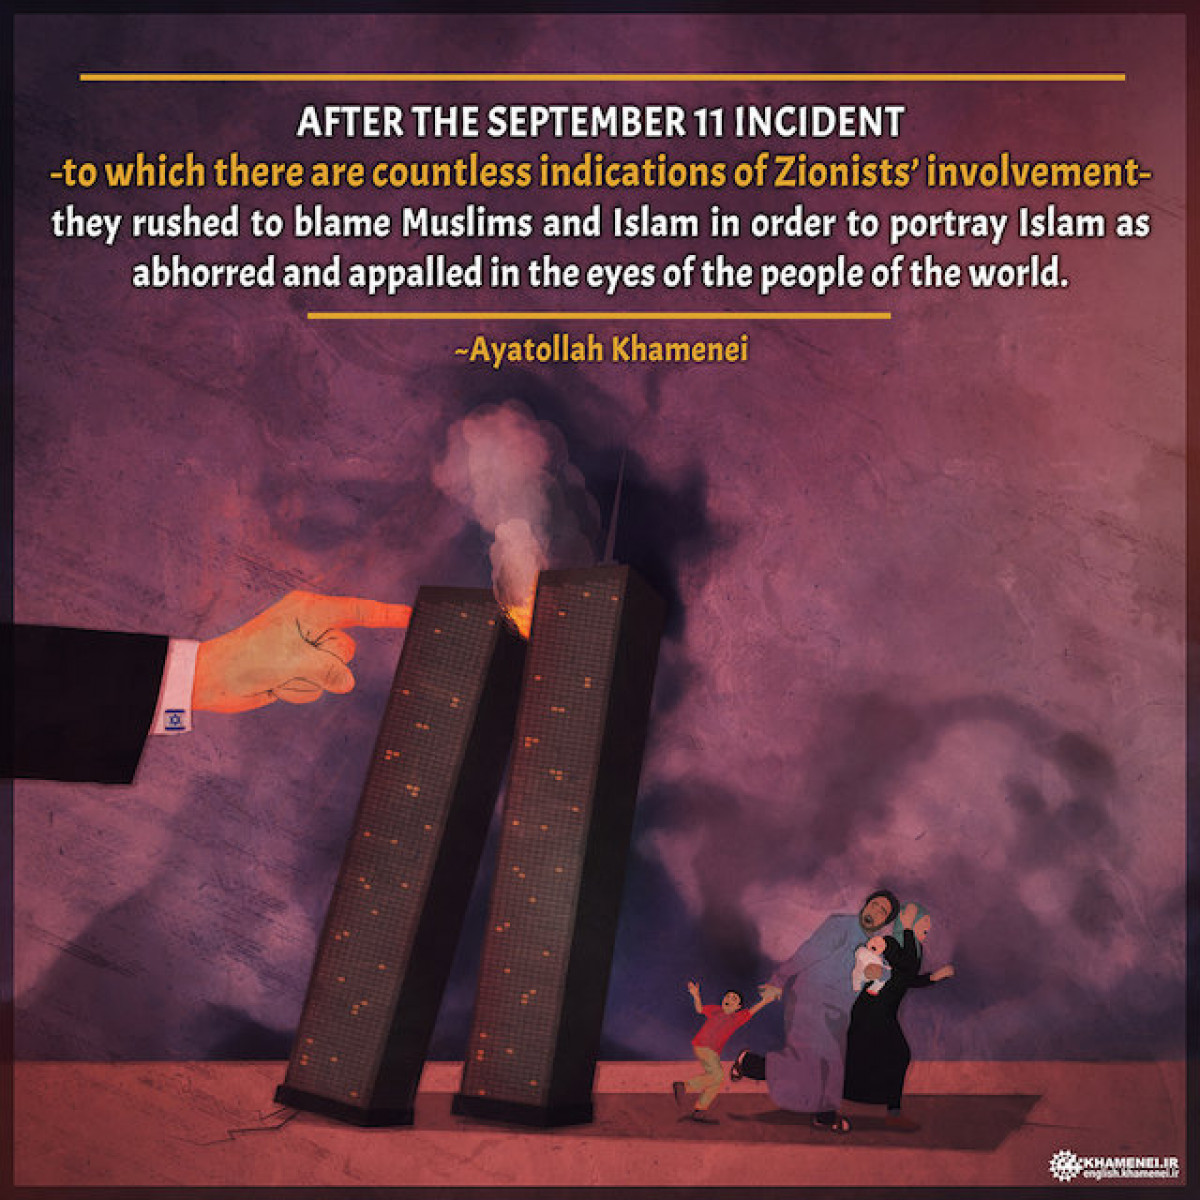 The trace of the Zionists in the Incident of 9/11 to demonize Muslims